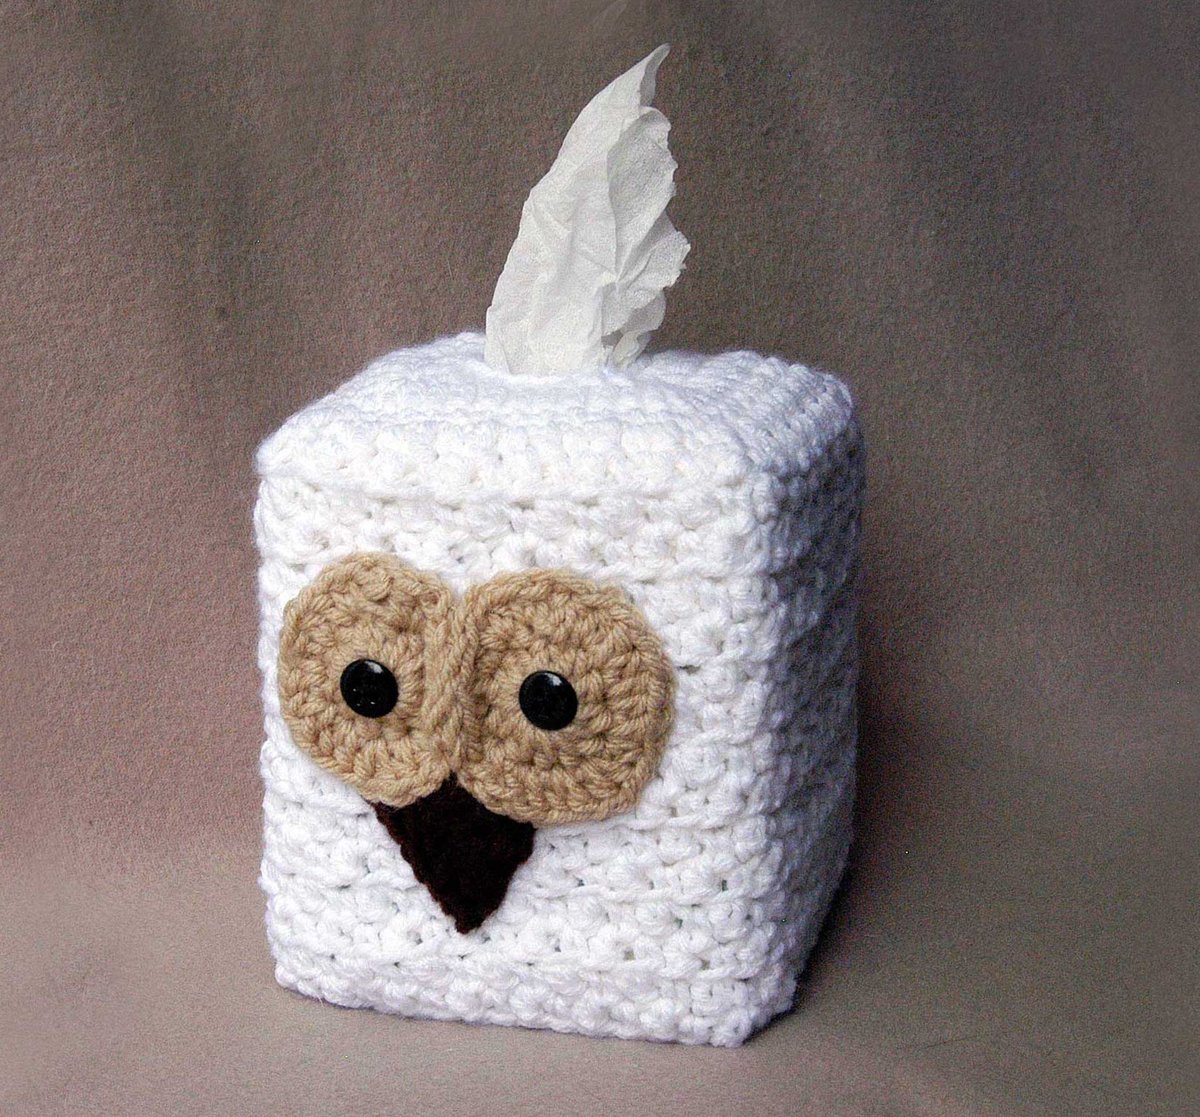 🦉BIRD Lover? Check out this original Owl Decor Tissue Box Cover nutmegcottage.etsy.com/listing/150366… #owl #etsy #pottiteam #mondayvibes #gift #buynow